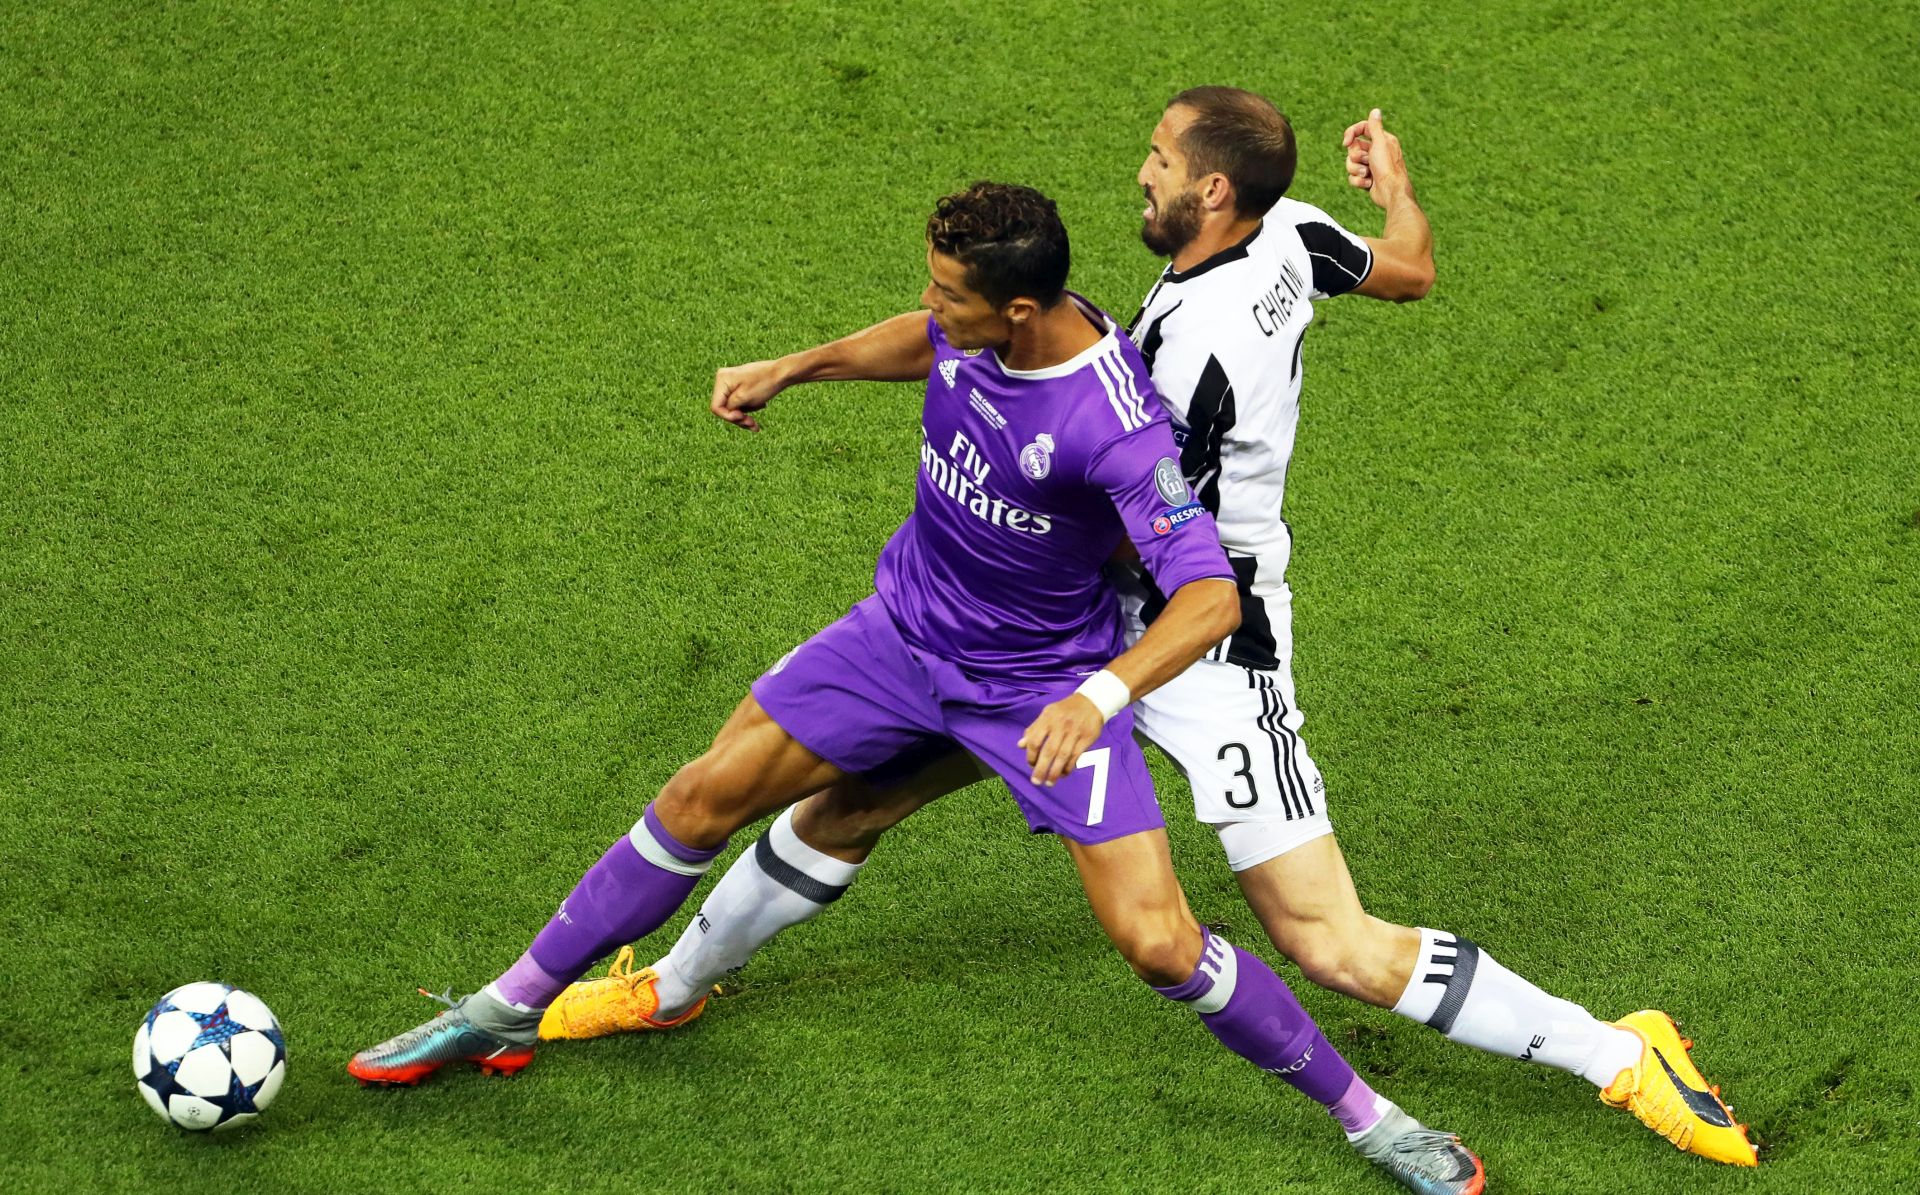 epa06008544 Juventus' Giorgio Chiellini (R) in action against Real Madrid's Cristiano Ronaldo (L) during the UEFA Champions League final between Juventus FC and Real Madrid at the National Stadium of Wales in Cardiff, Britain, 03 June 2017. EPA/GEOFF CADDICK